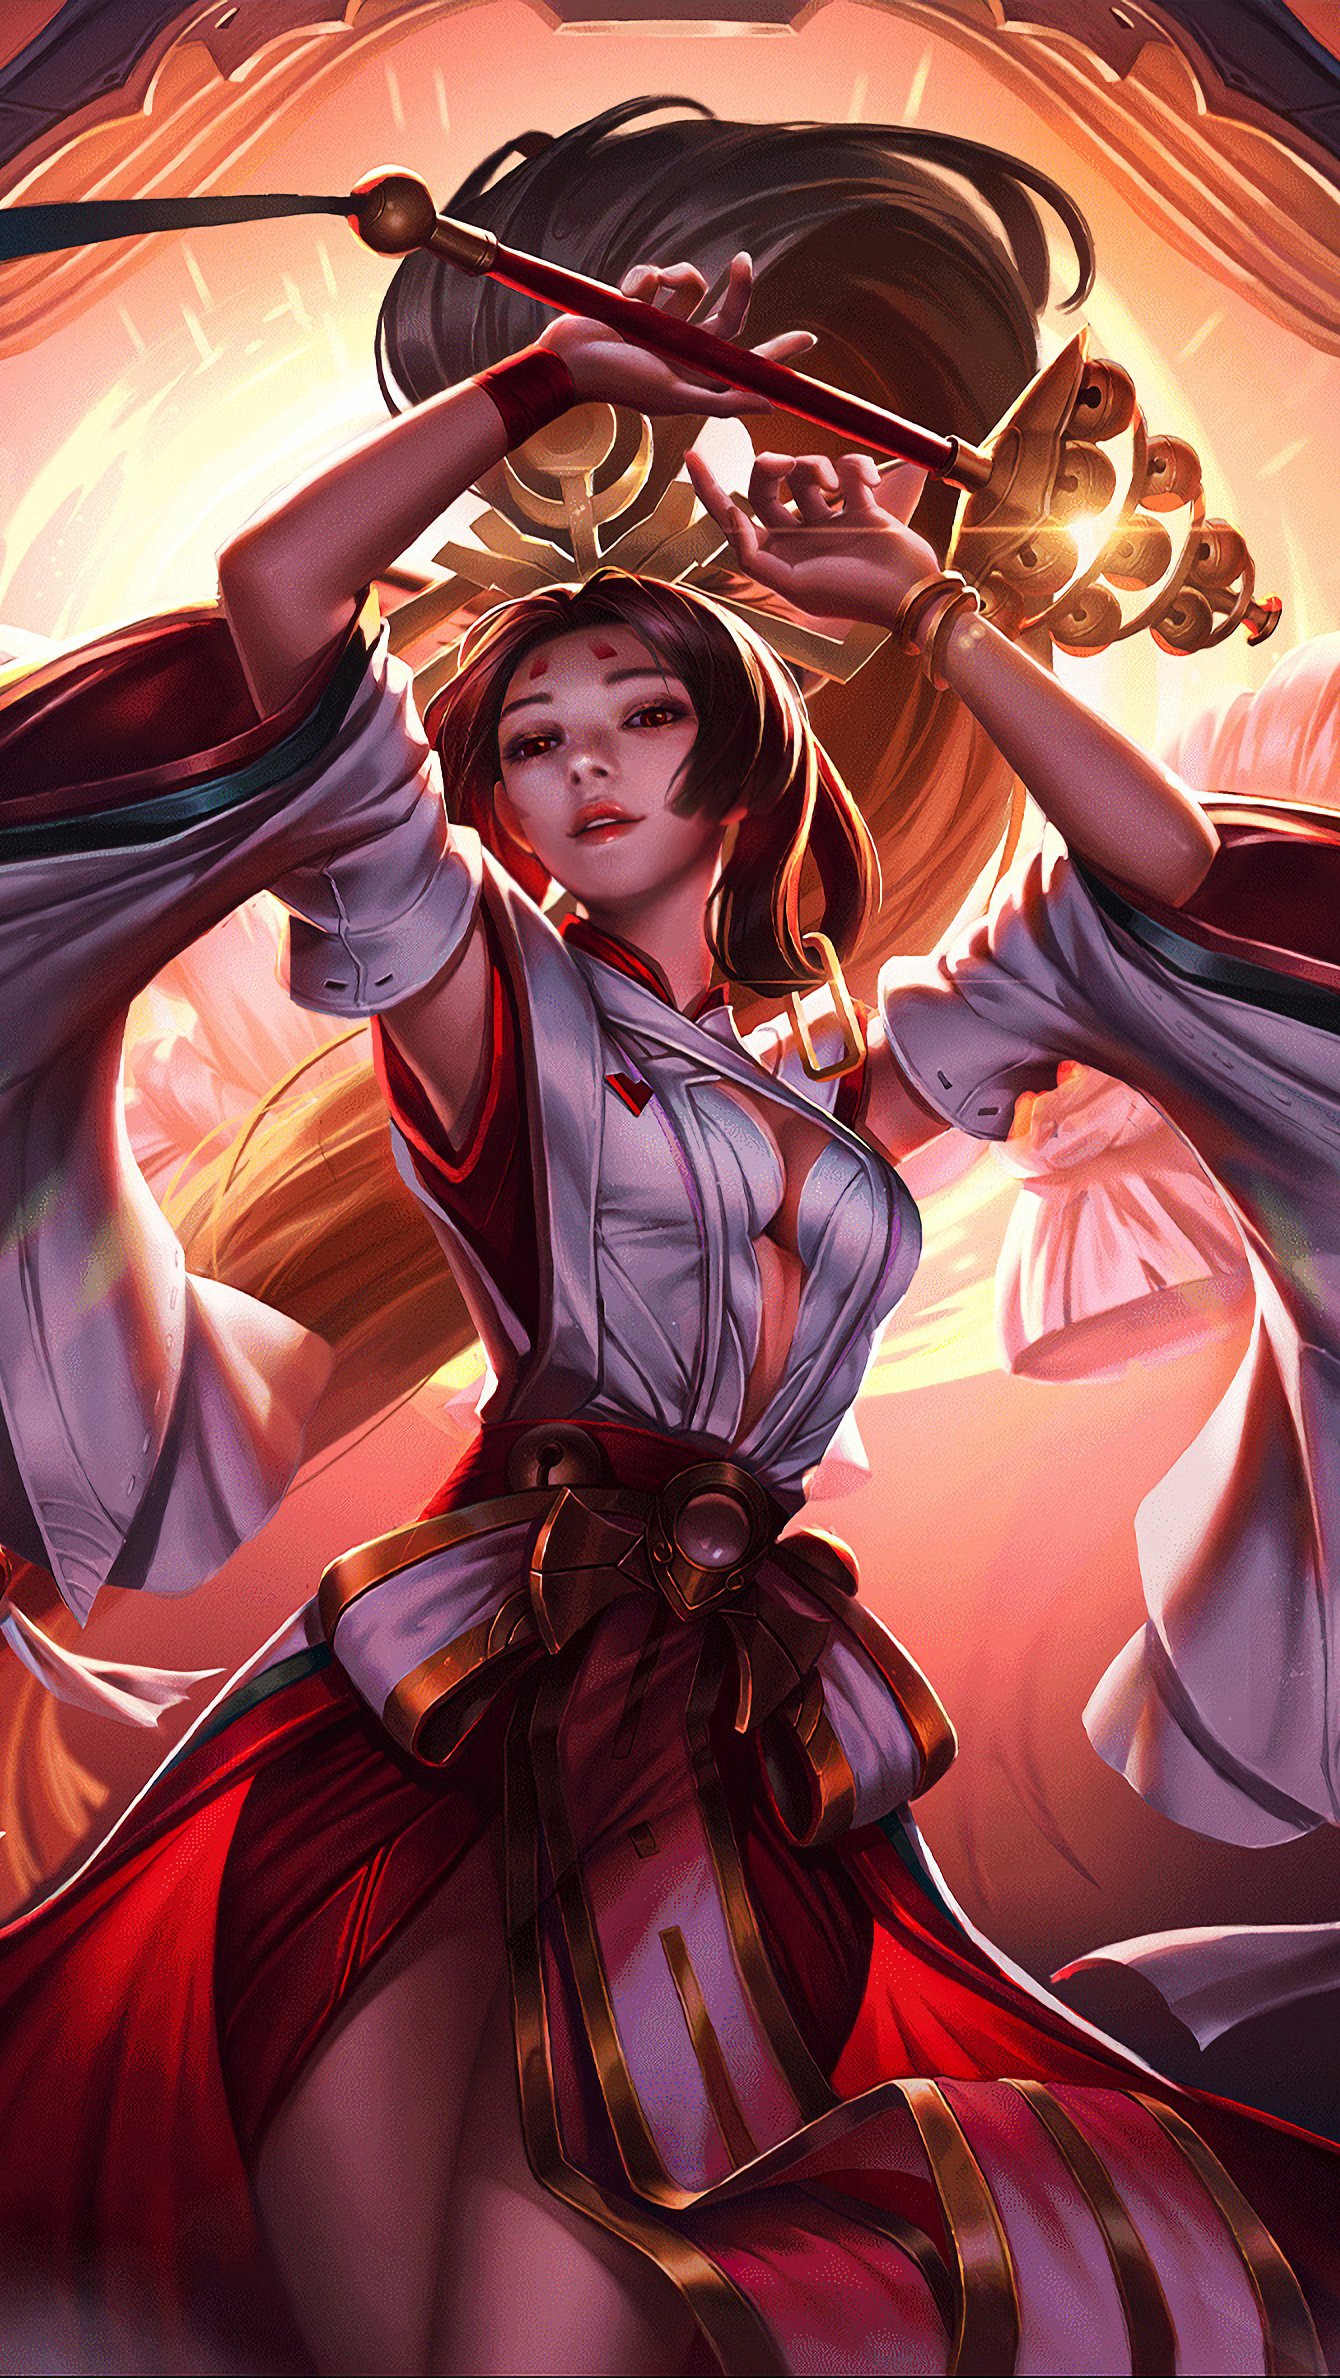 Wallpaper Arum from Arena of Valor Vertical